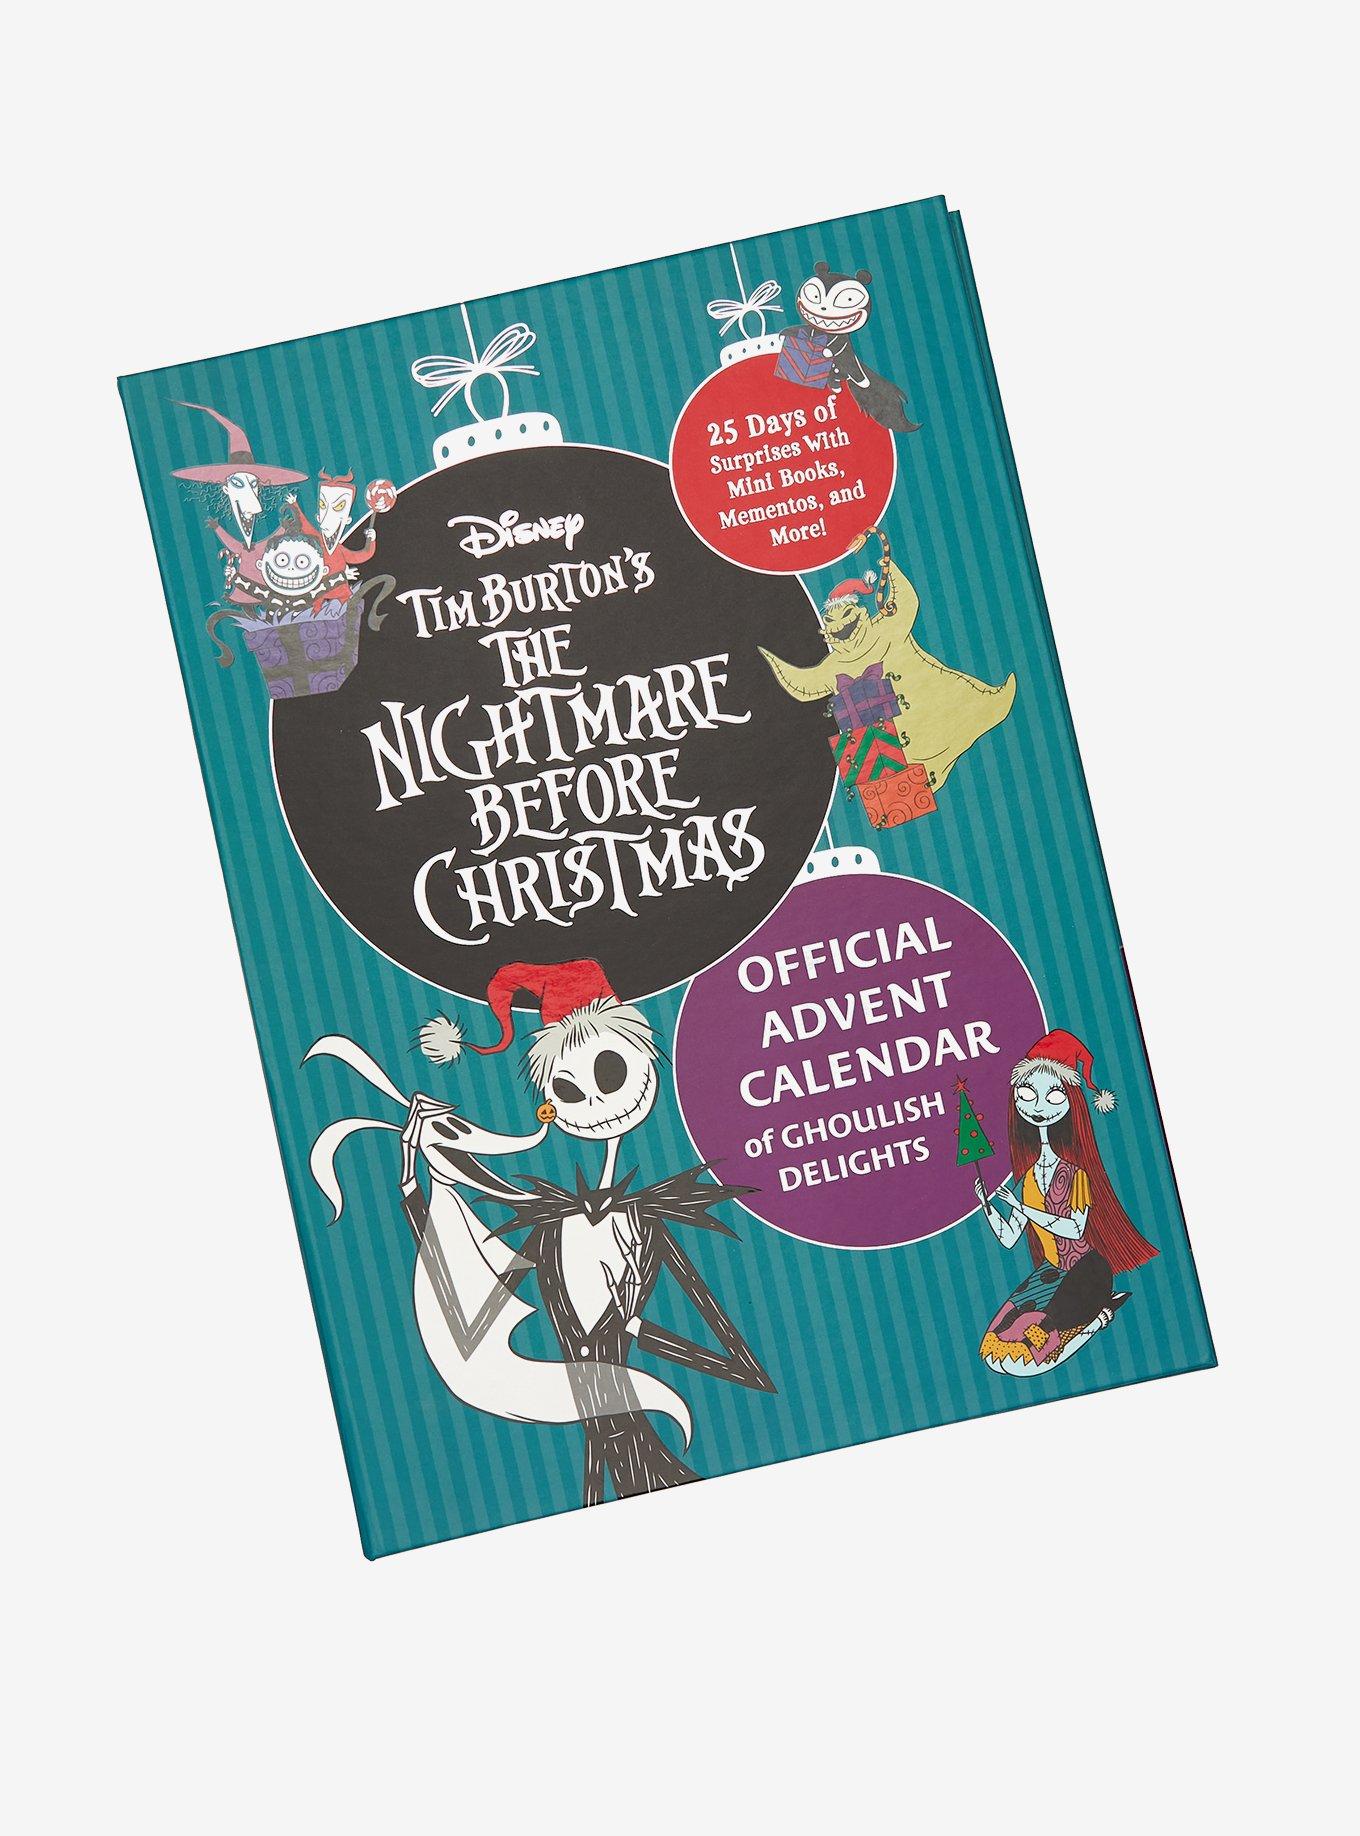 The Nightmare Before Christmas Holiday Advent Calendar